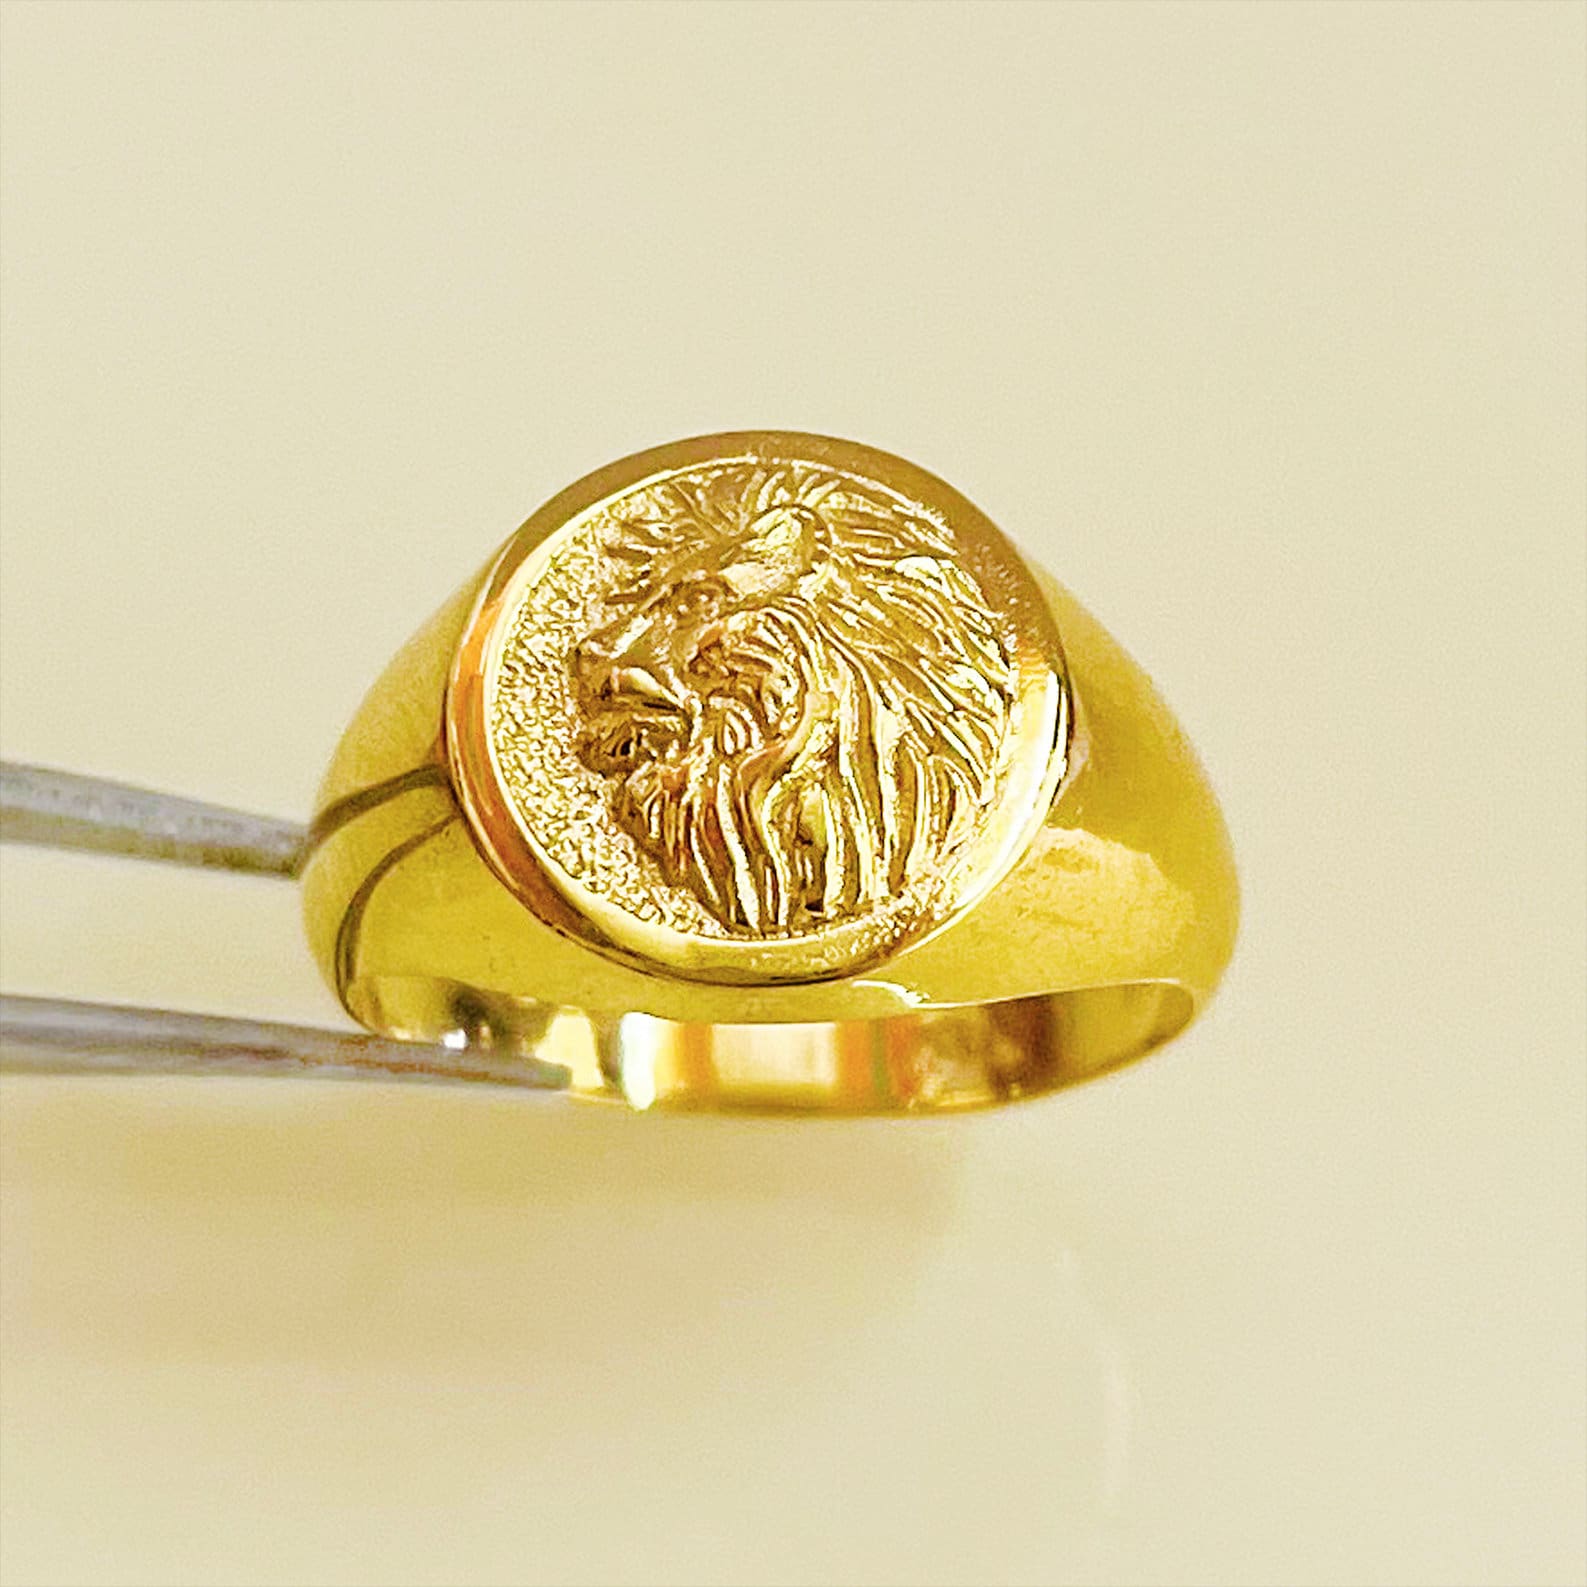 Stainless Steel 14K Accent Lion Head Ring Animal: 31941580914757